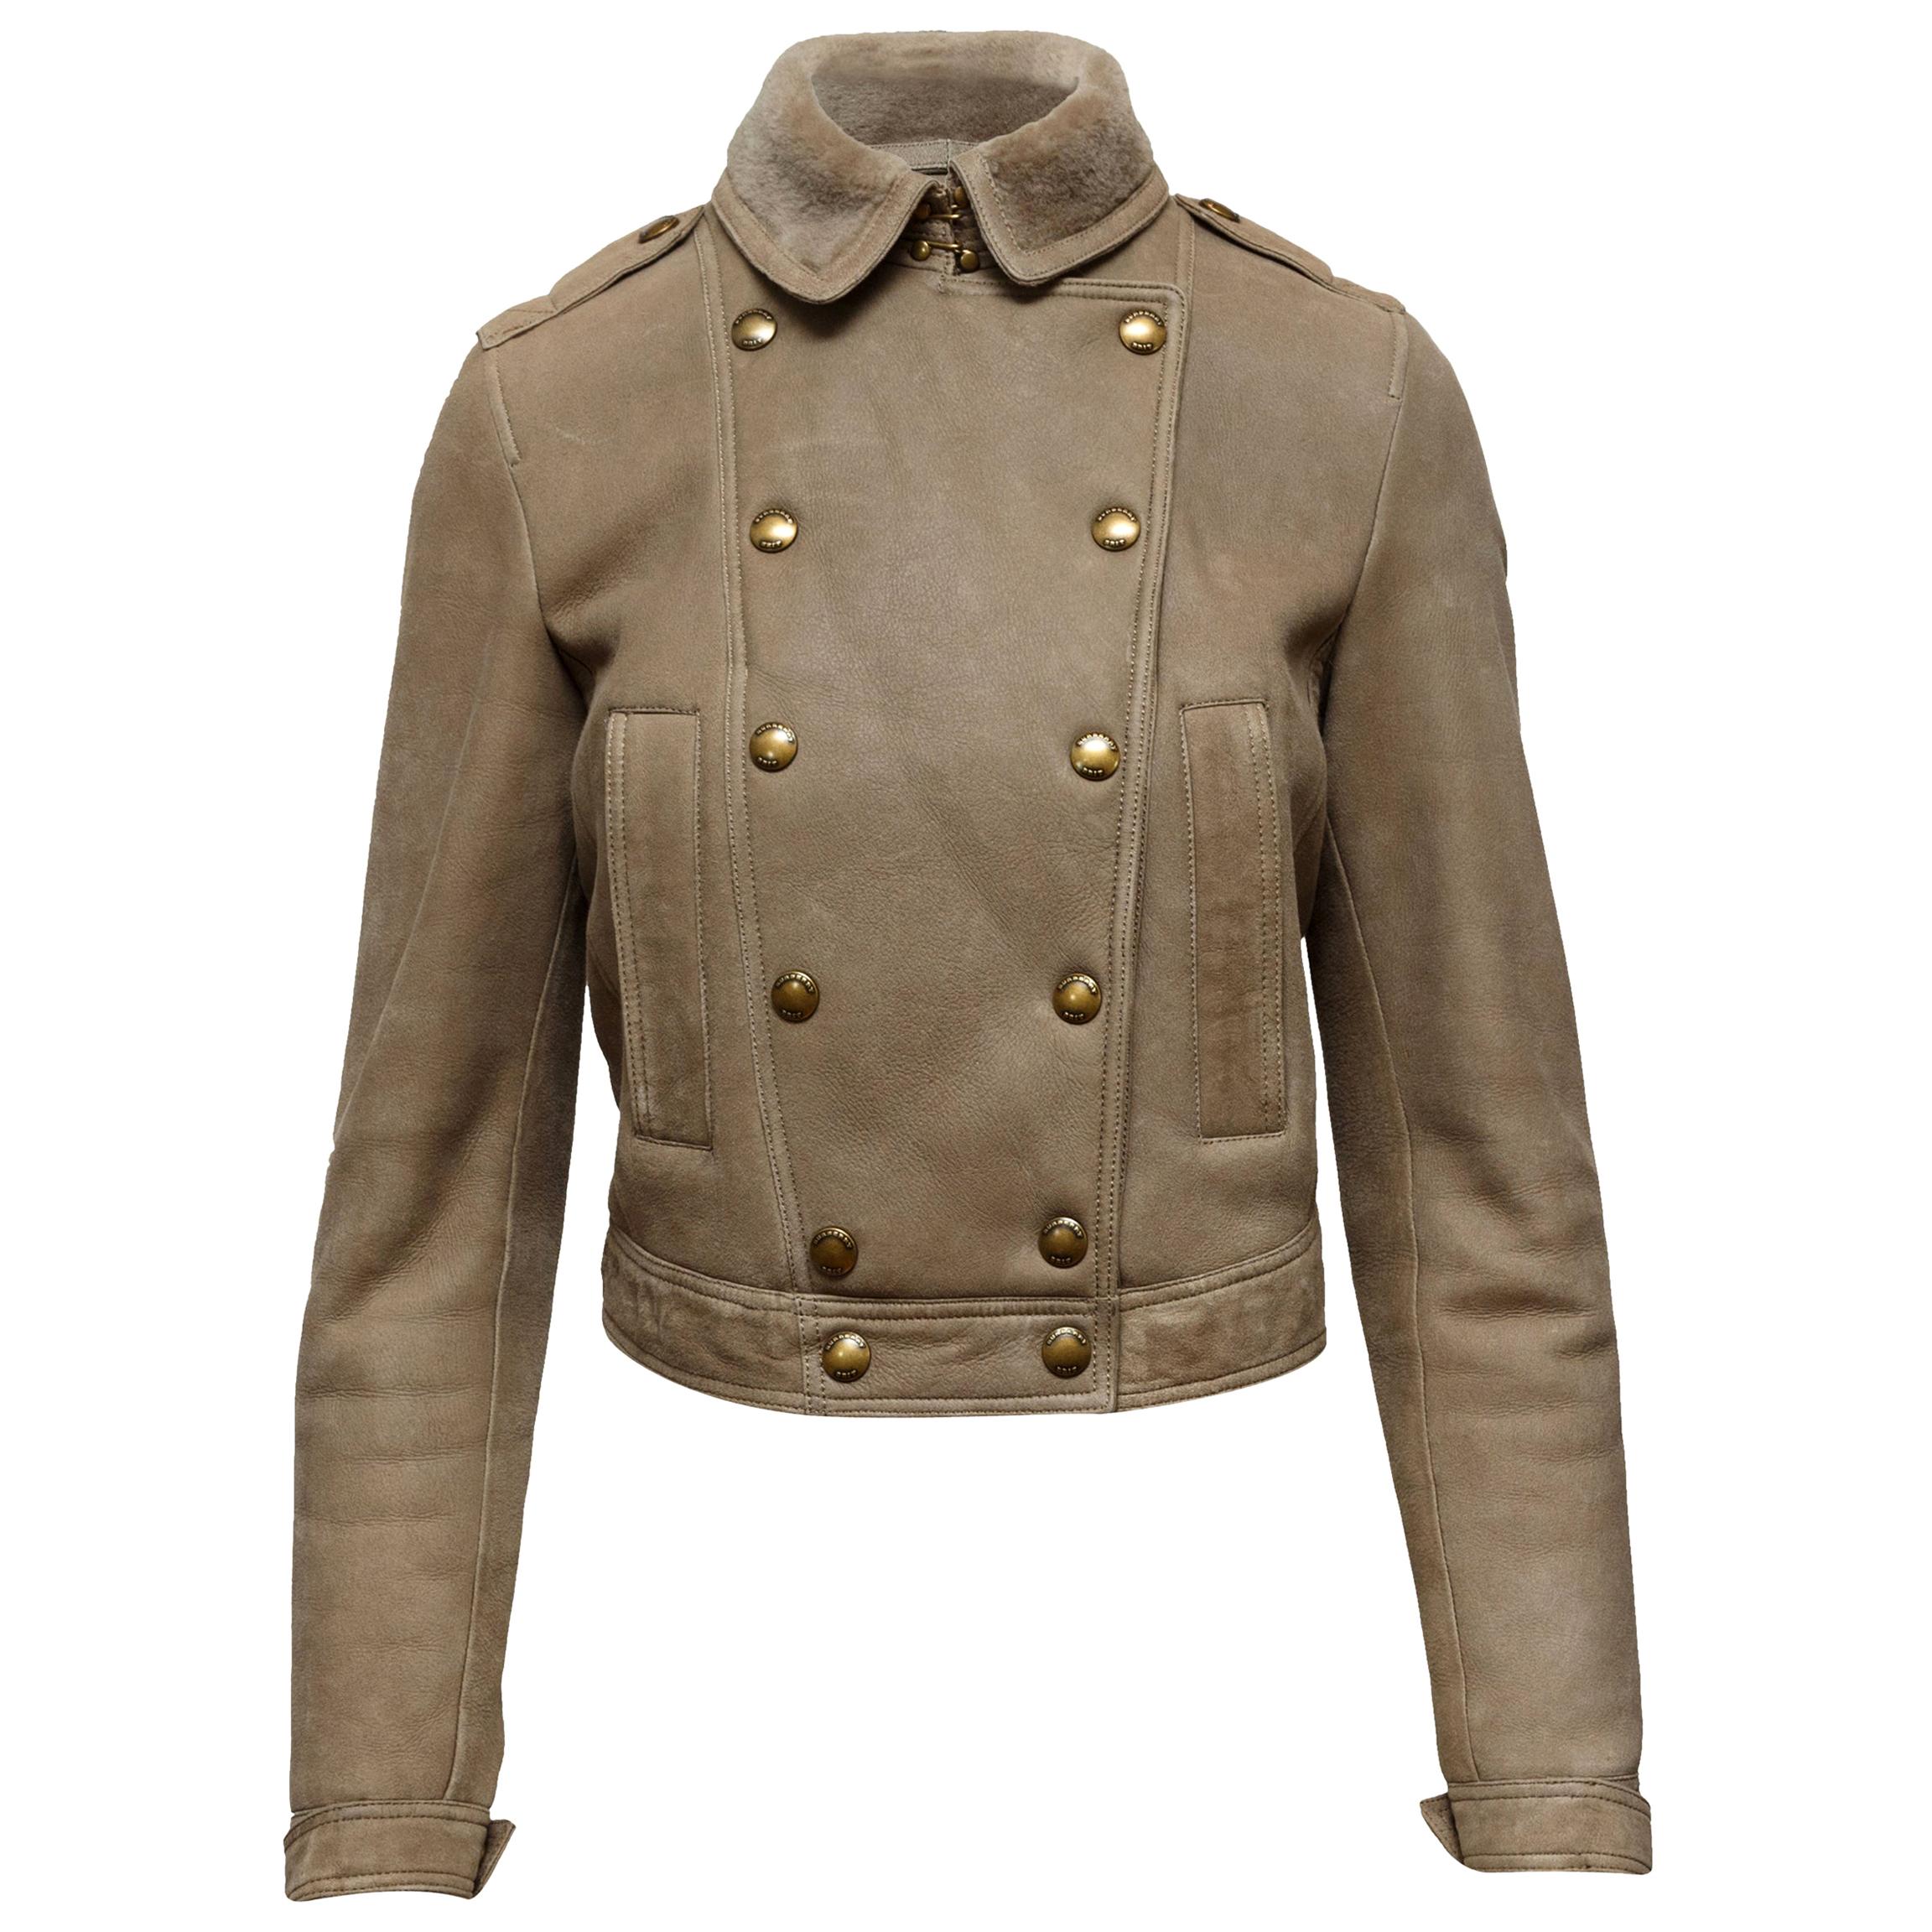 Burberry Brit  Beige Double-Breasted Shearling Jacket